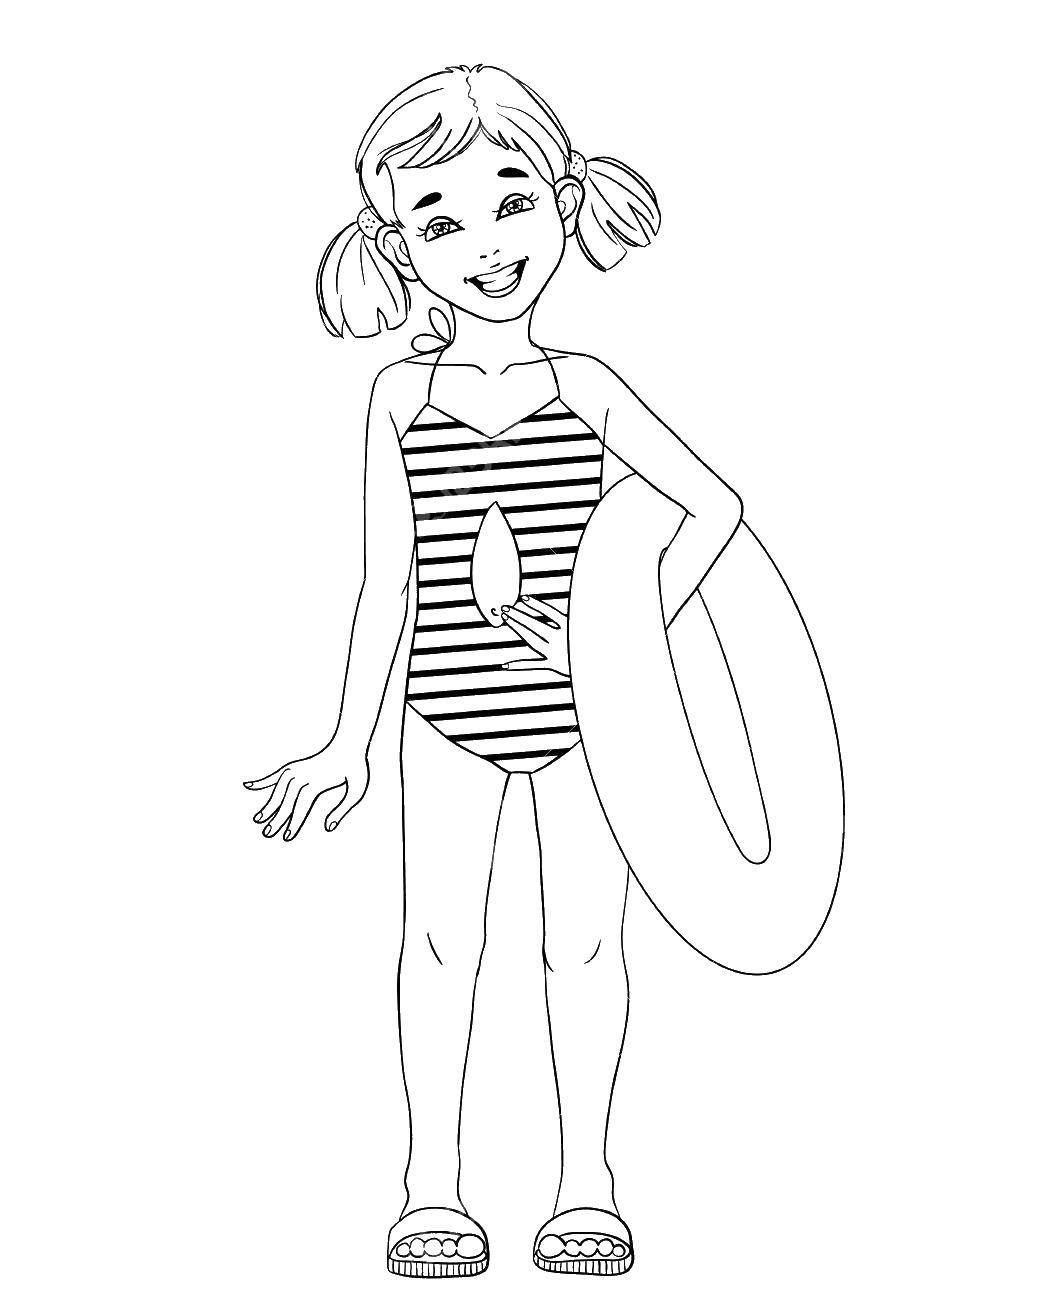 Coloring Beach girl. Category children. Tags:  Children, girl.